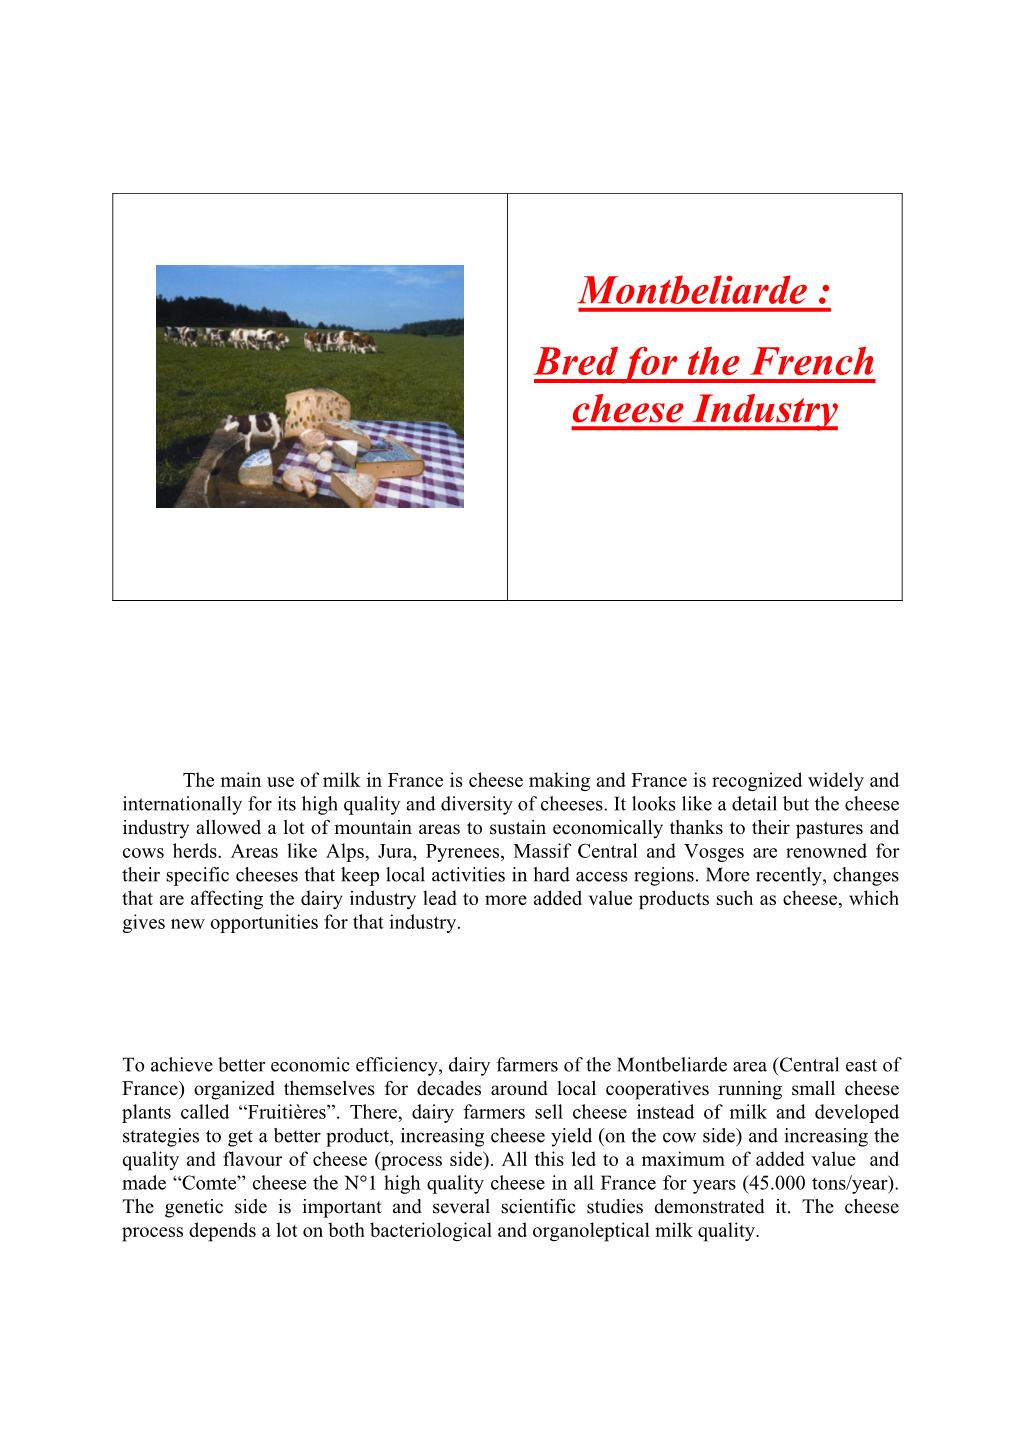 Montbeliarde : Bred for the French Cheese Industry